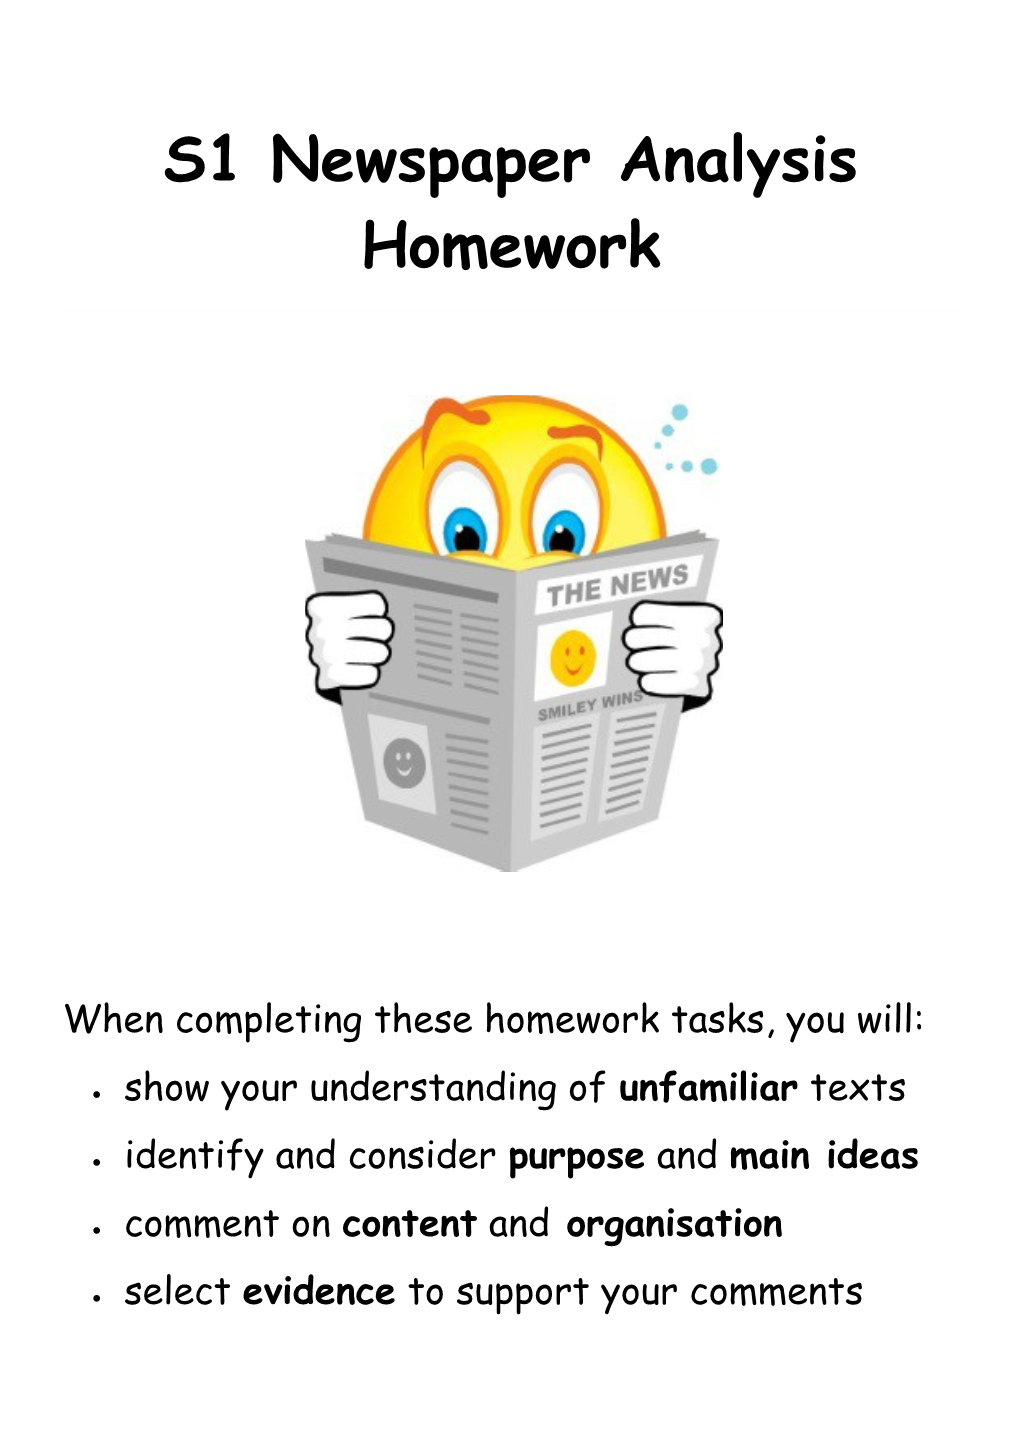 When Completing These Homework Tasks, You Will